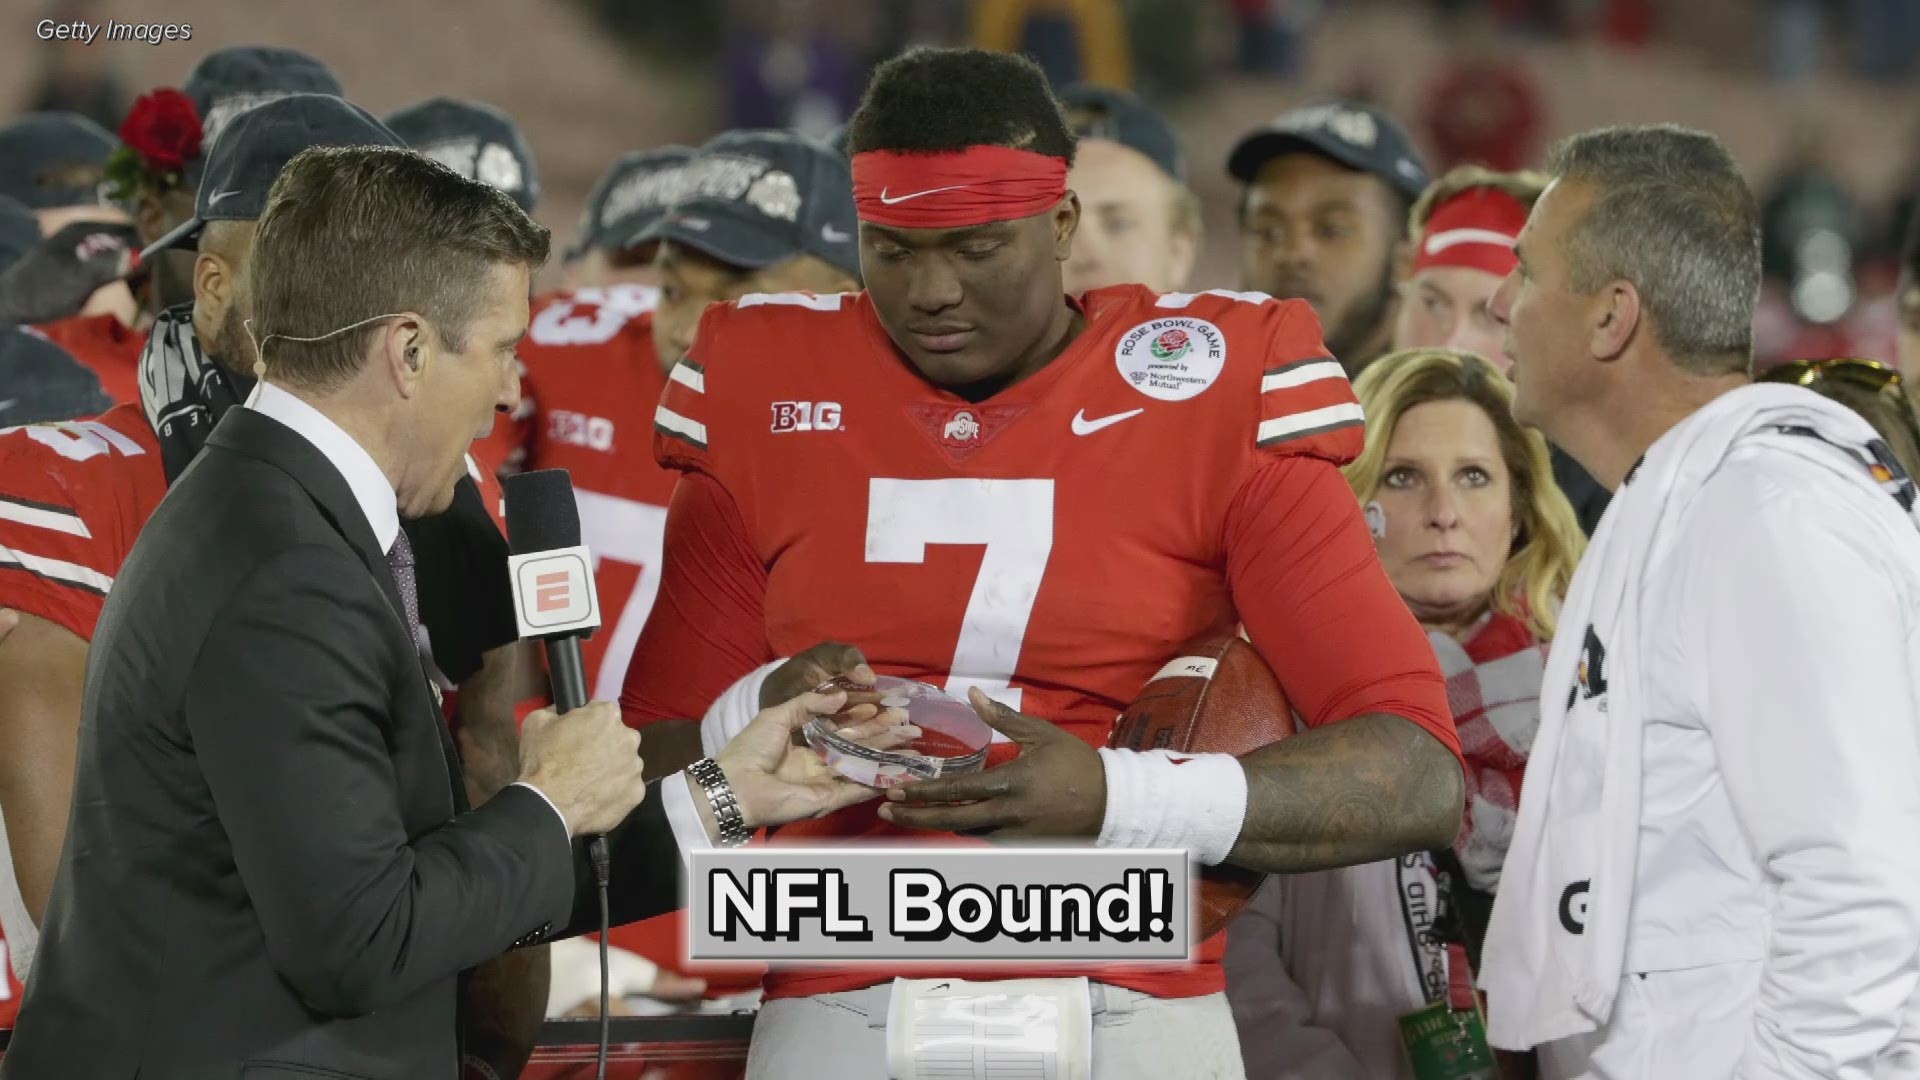 After his record-setting season, Dwayne Haskins is off to the NFL.